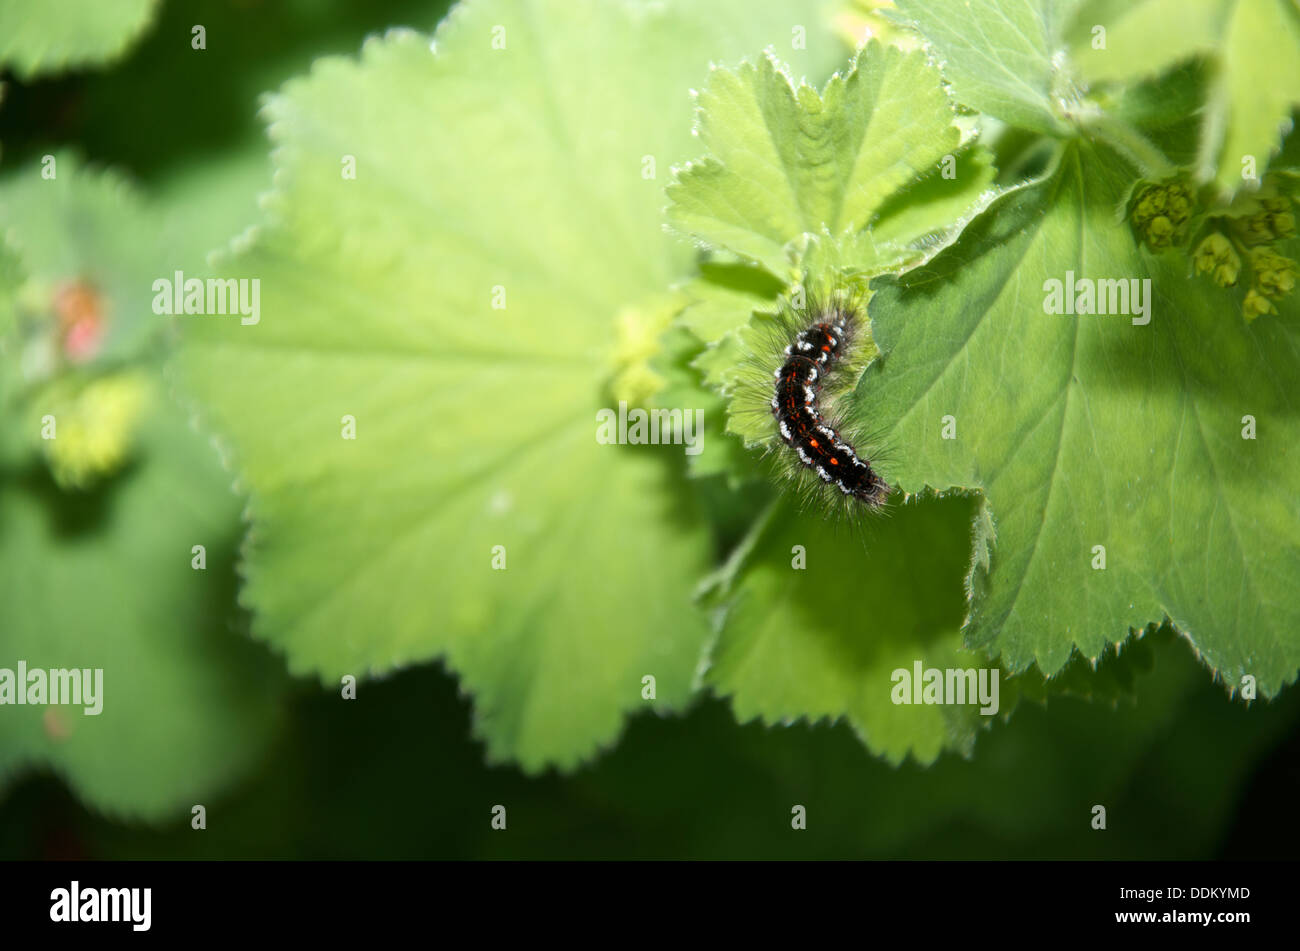 Brown Tailed Moth caterpillar on a large green leaf of Alchemilla Mollis  or Lady's Mantle Stock Photo